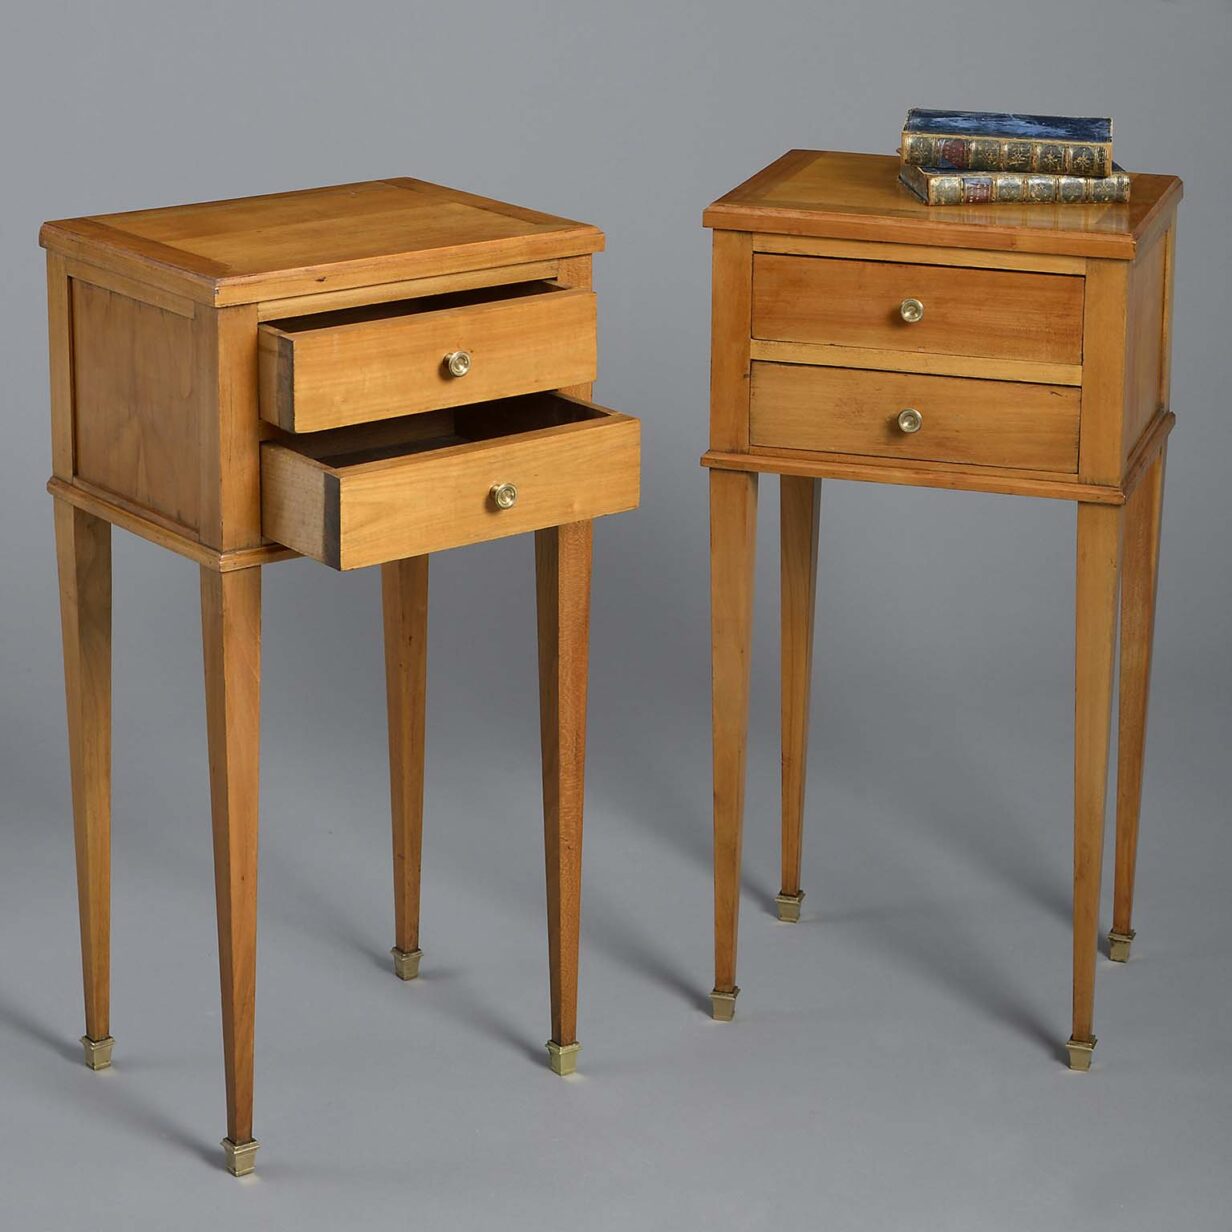 Pair of cherrywood bedside tables